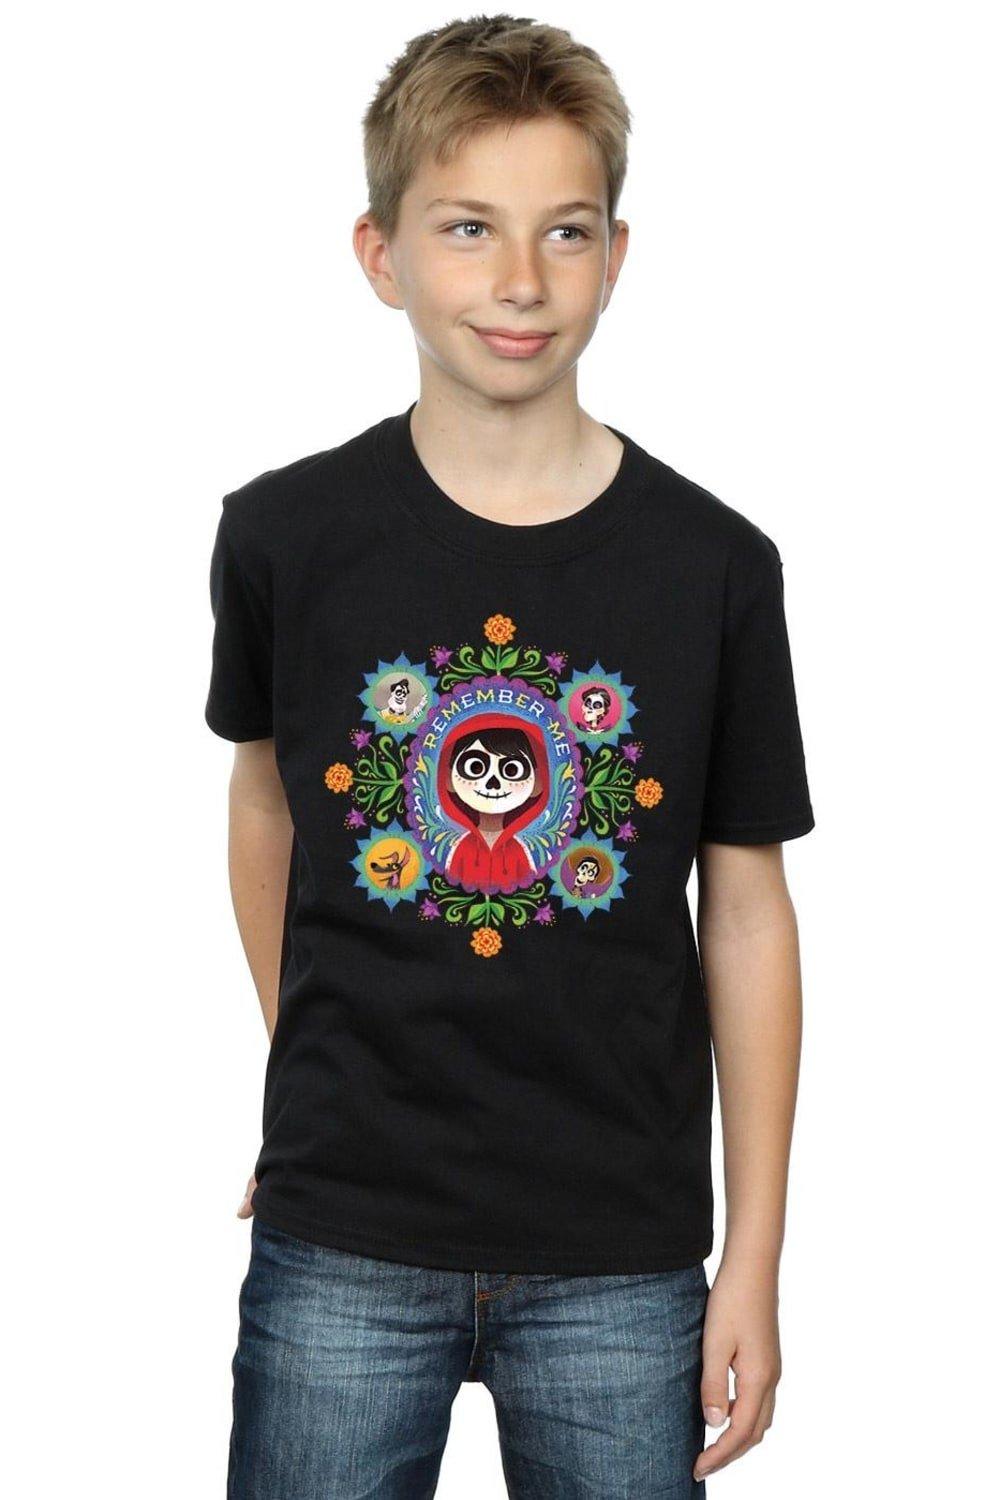 Coco Remember Me T-Shirt